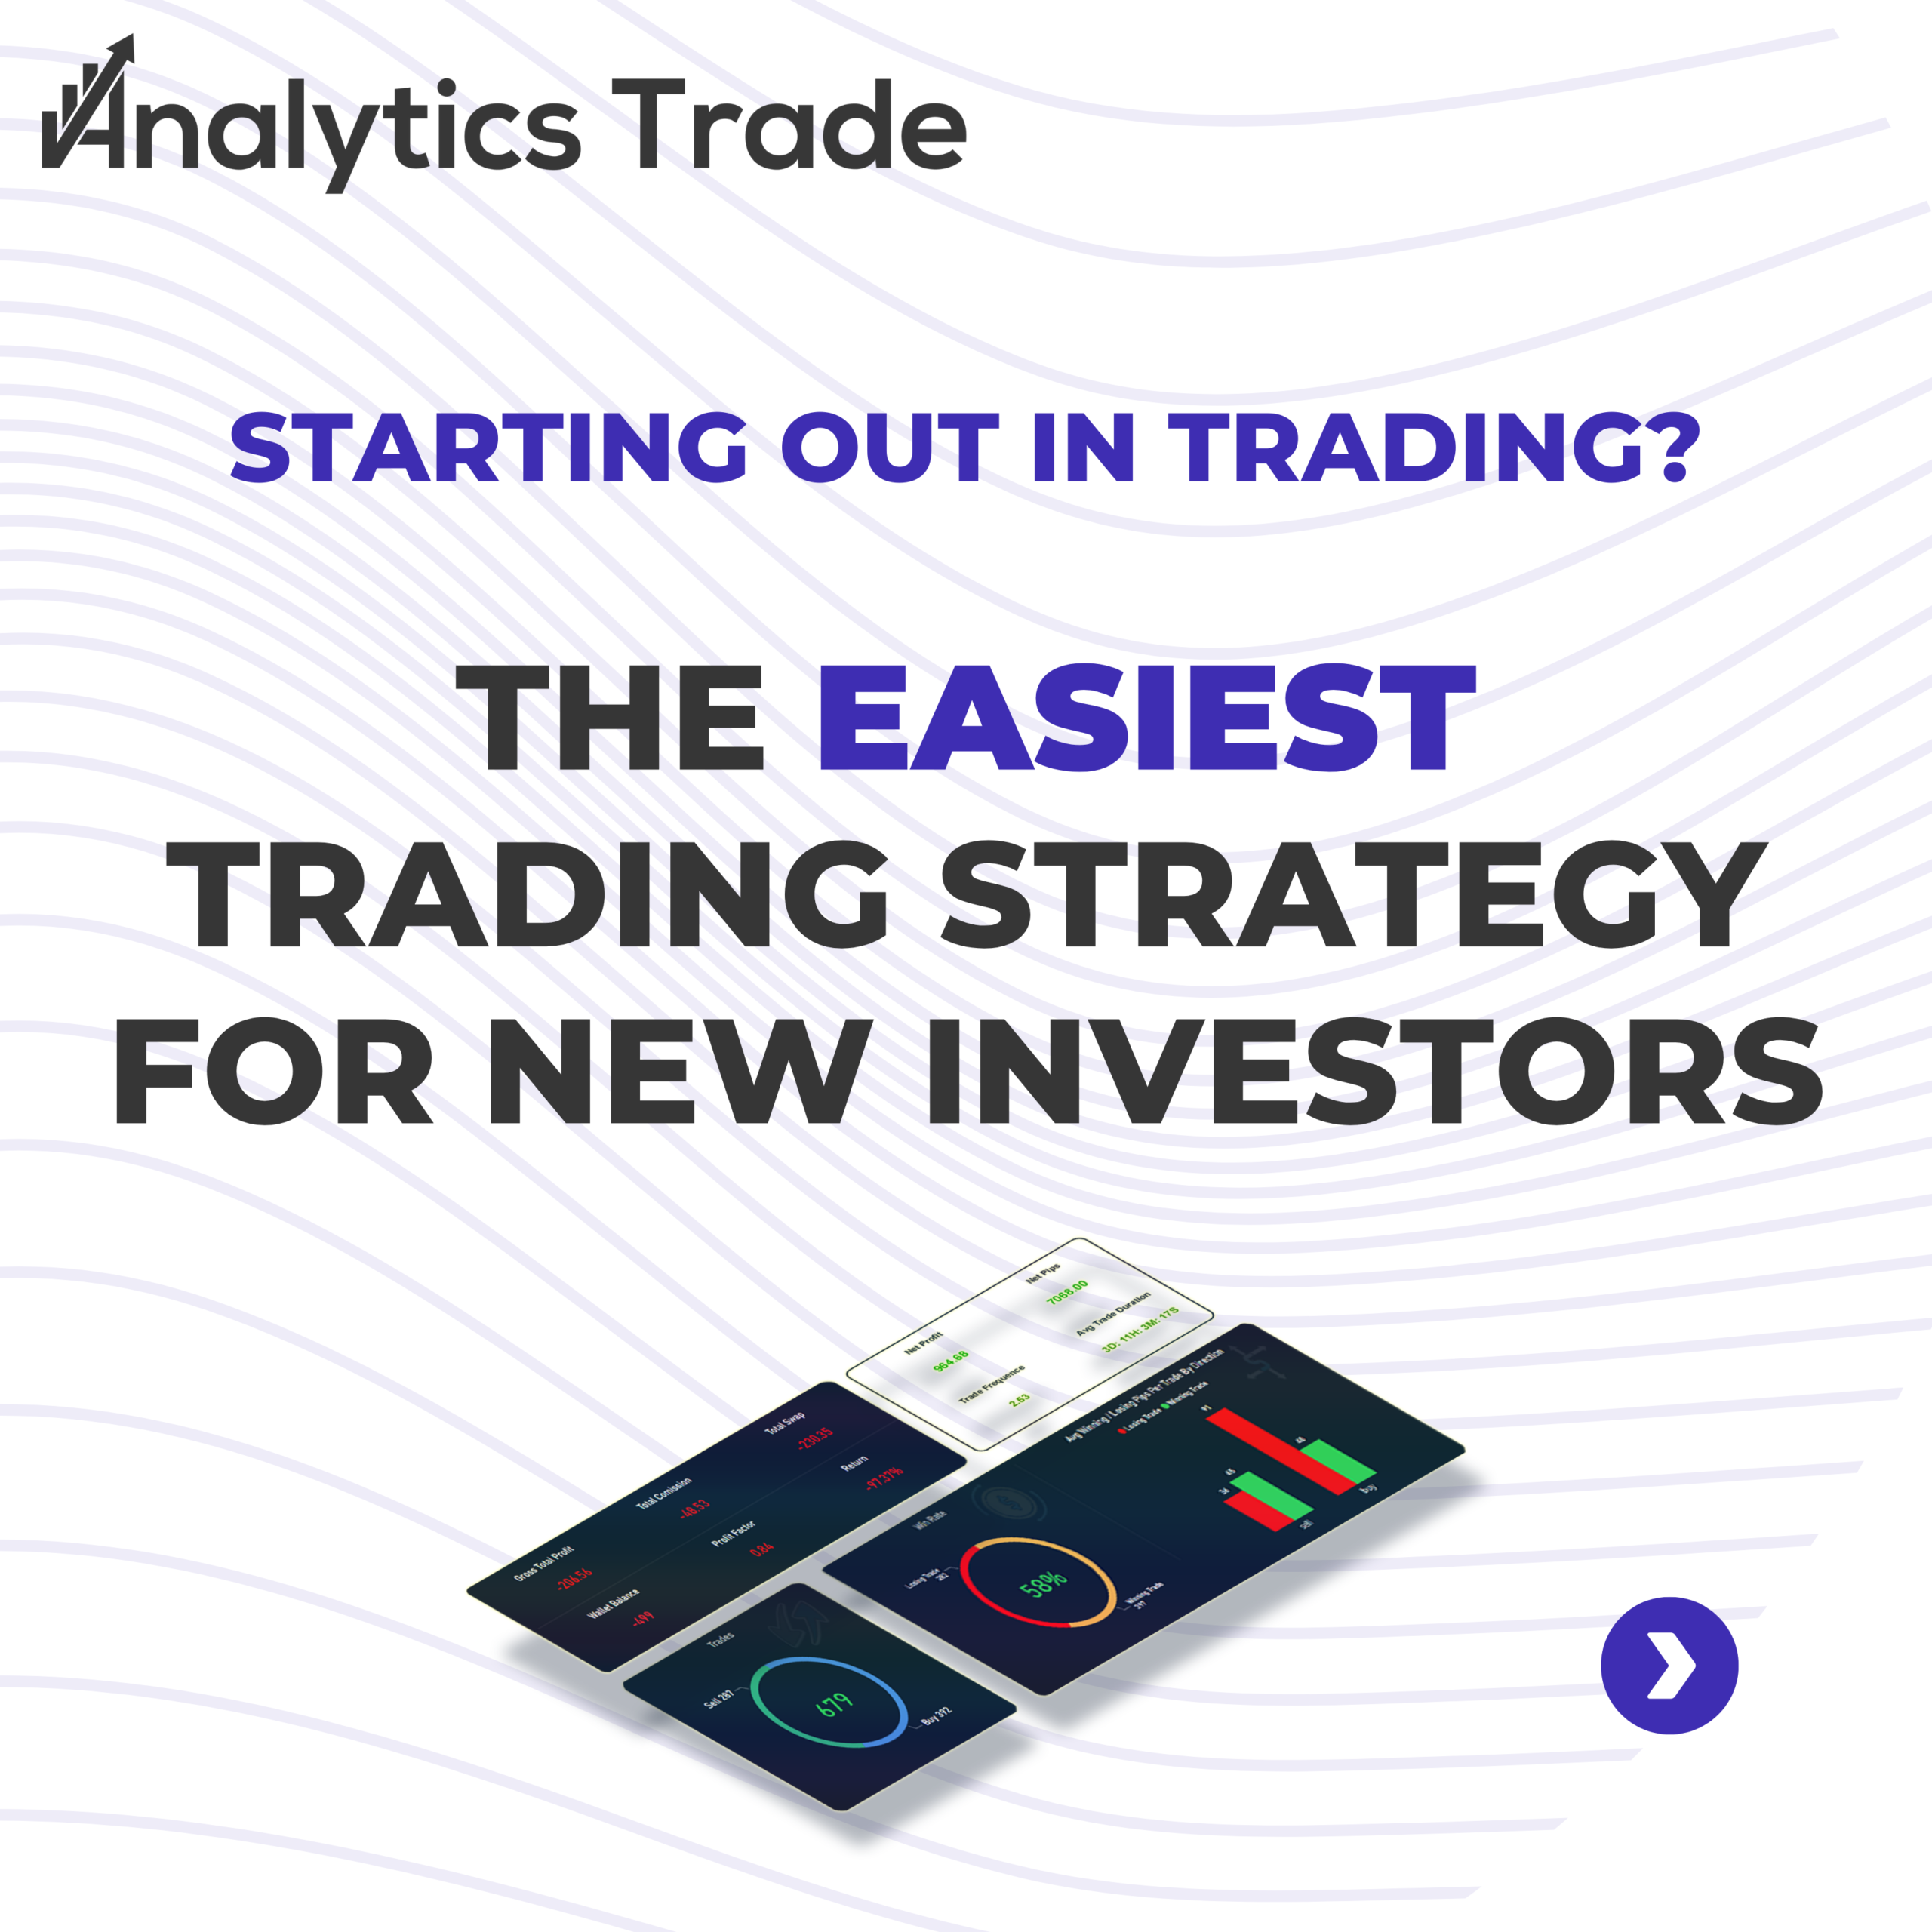 The easiest trading strategy for new traders